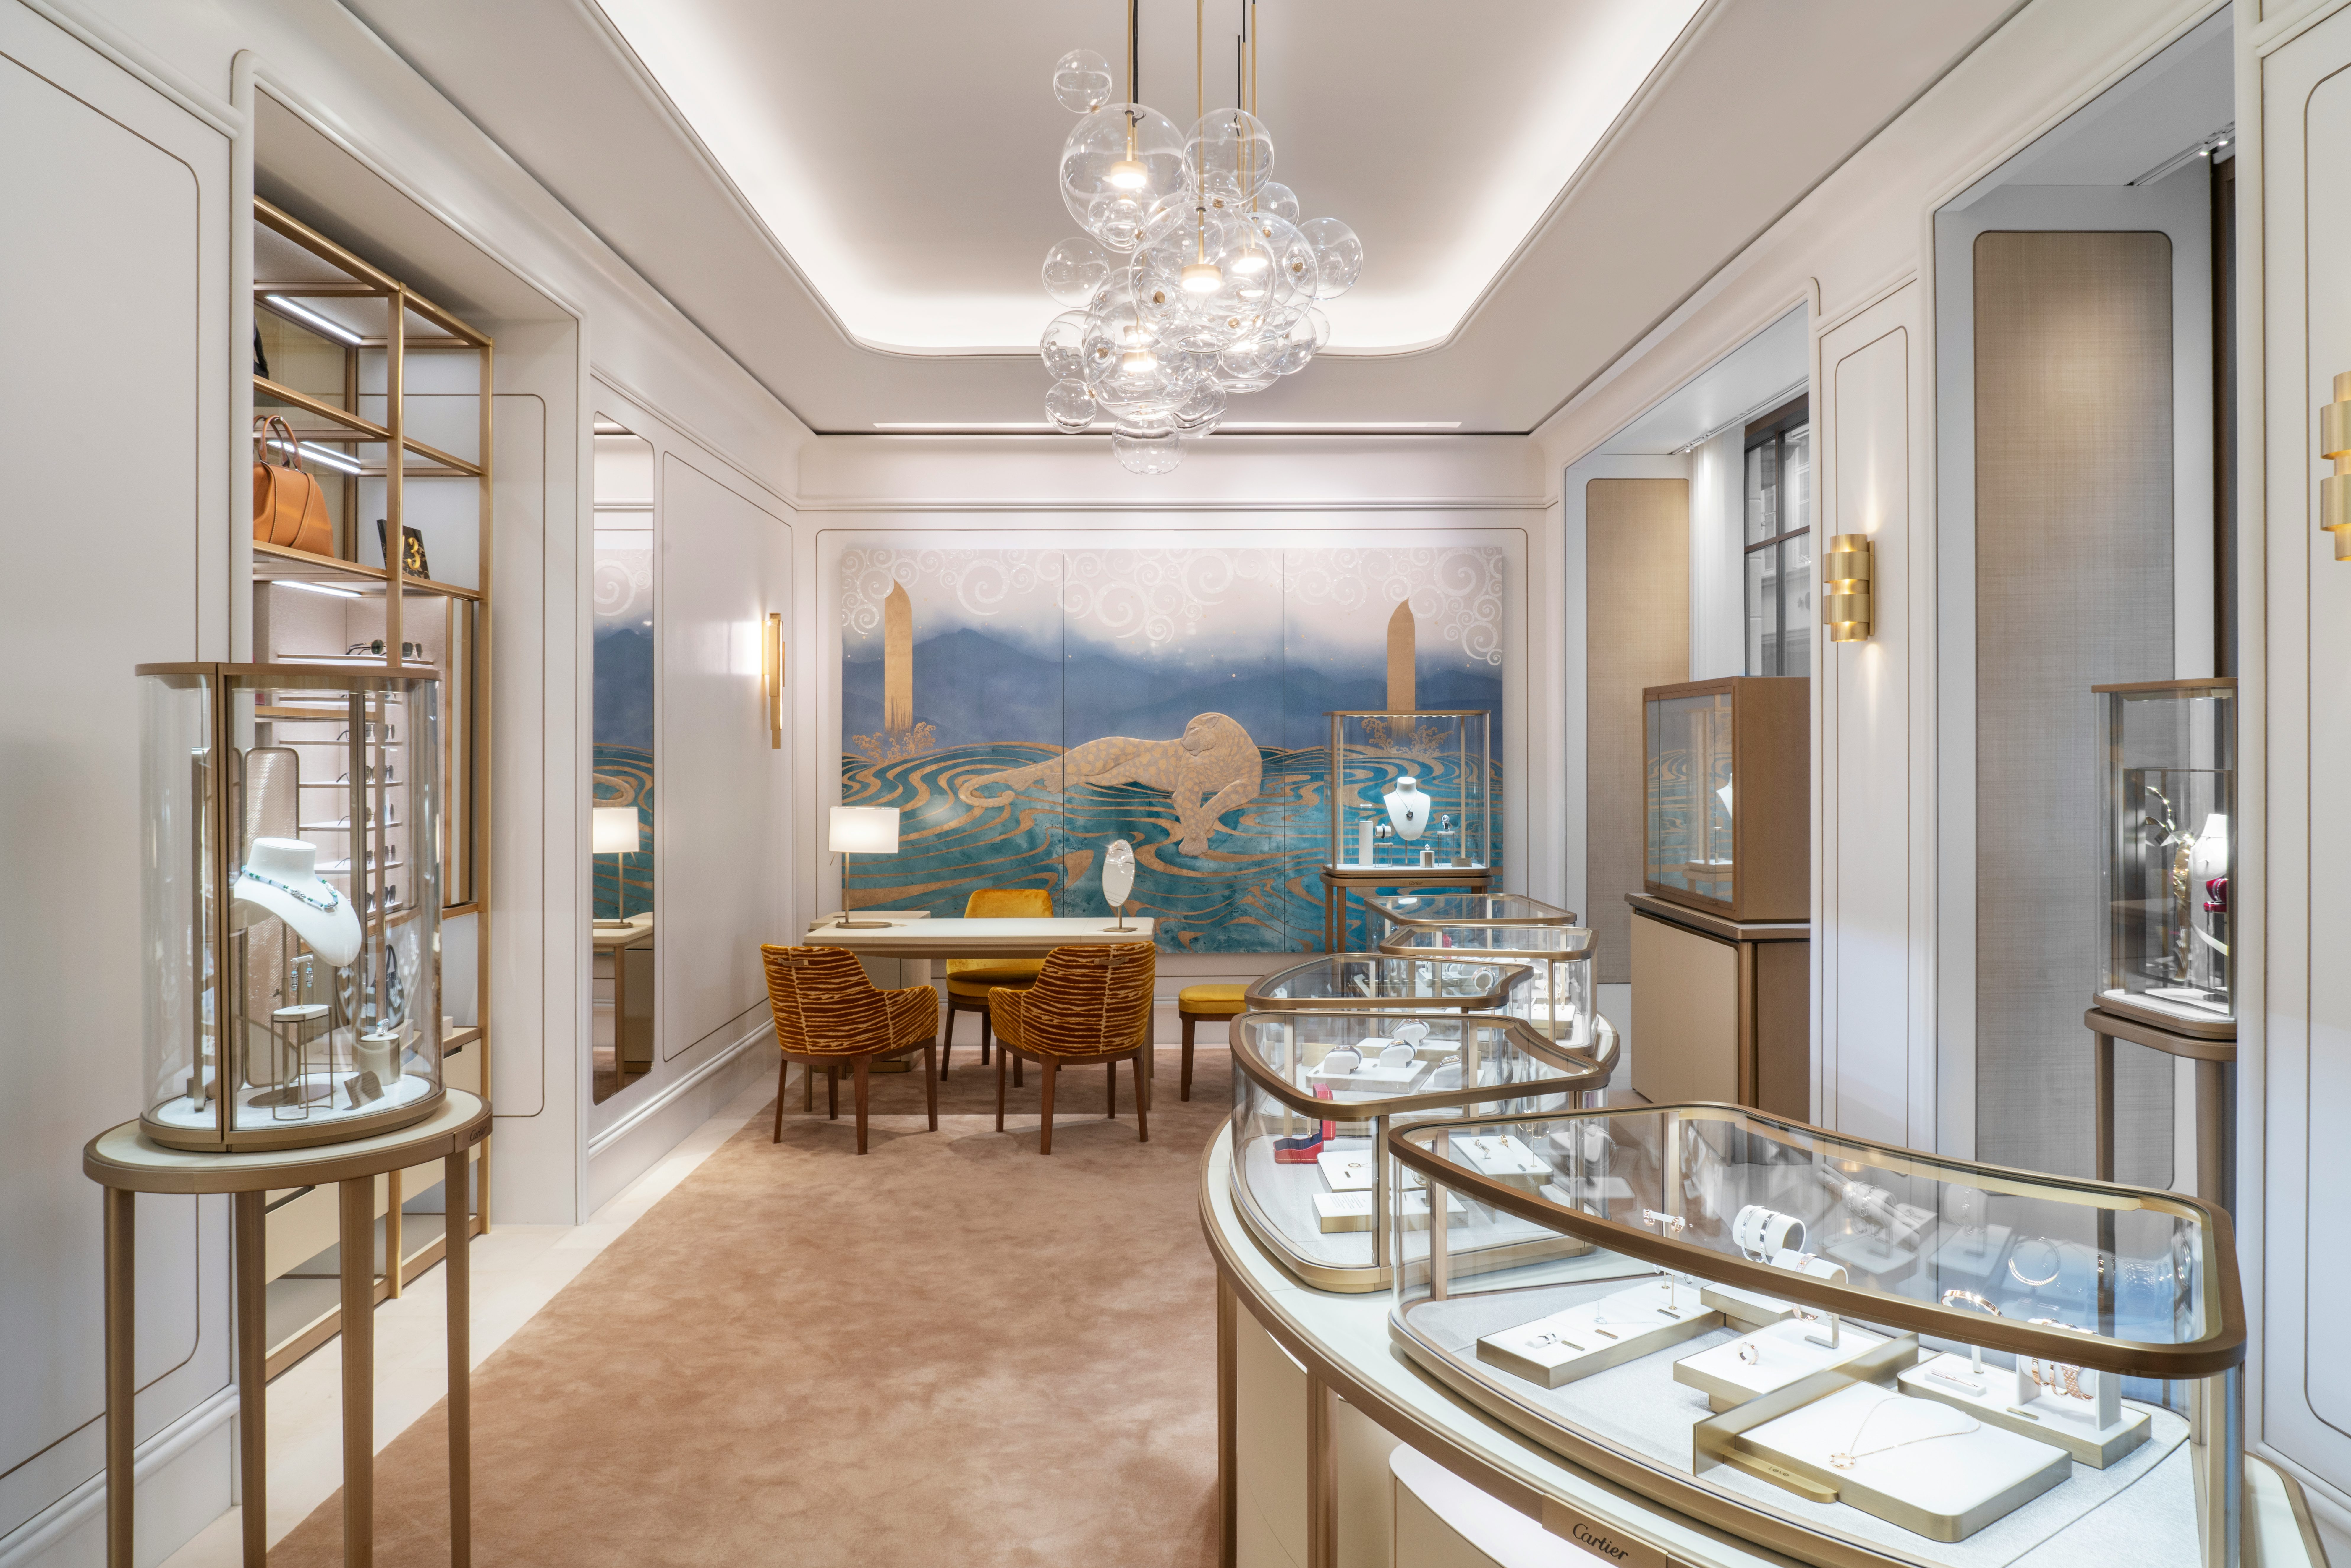 cartier business of fashion